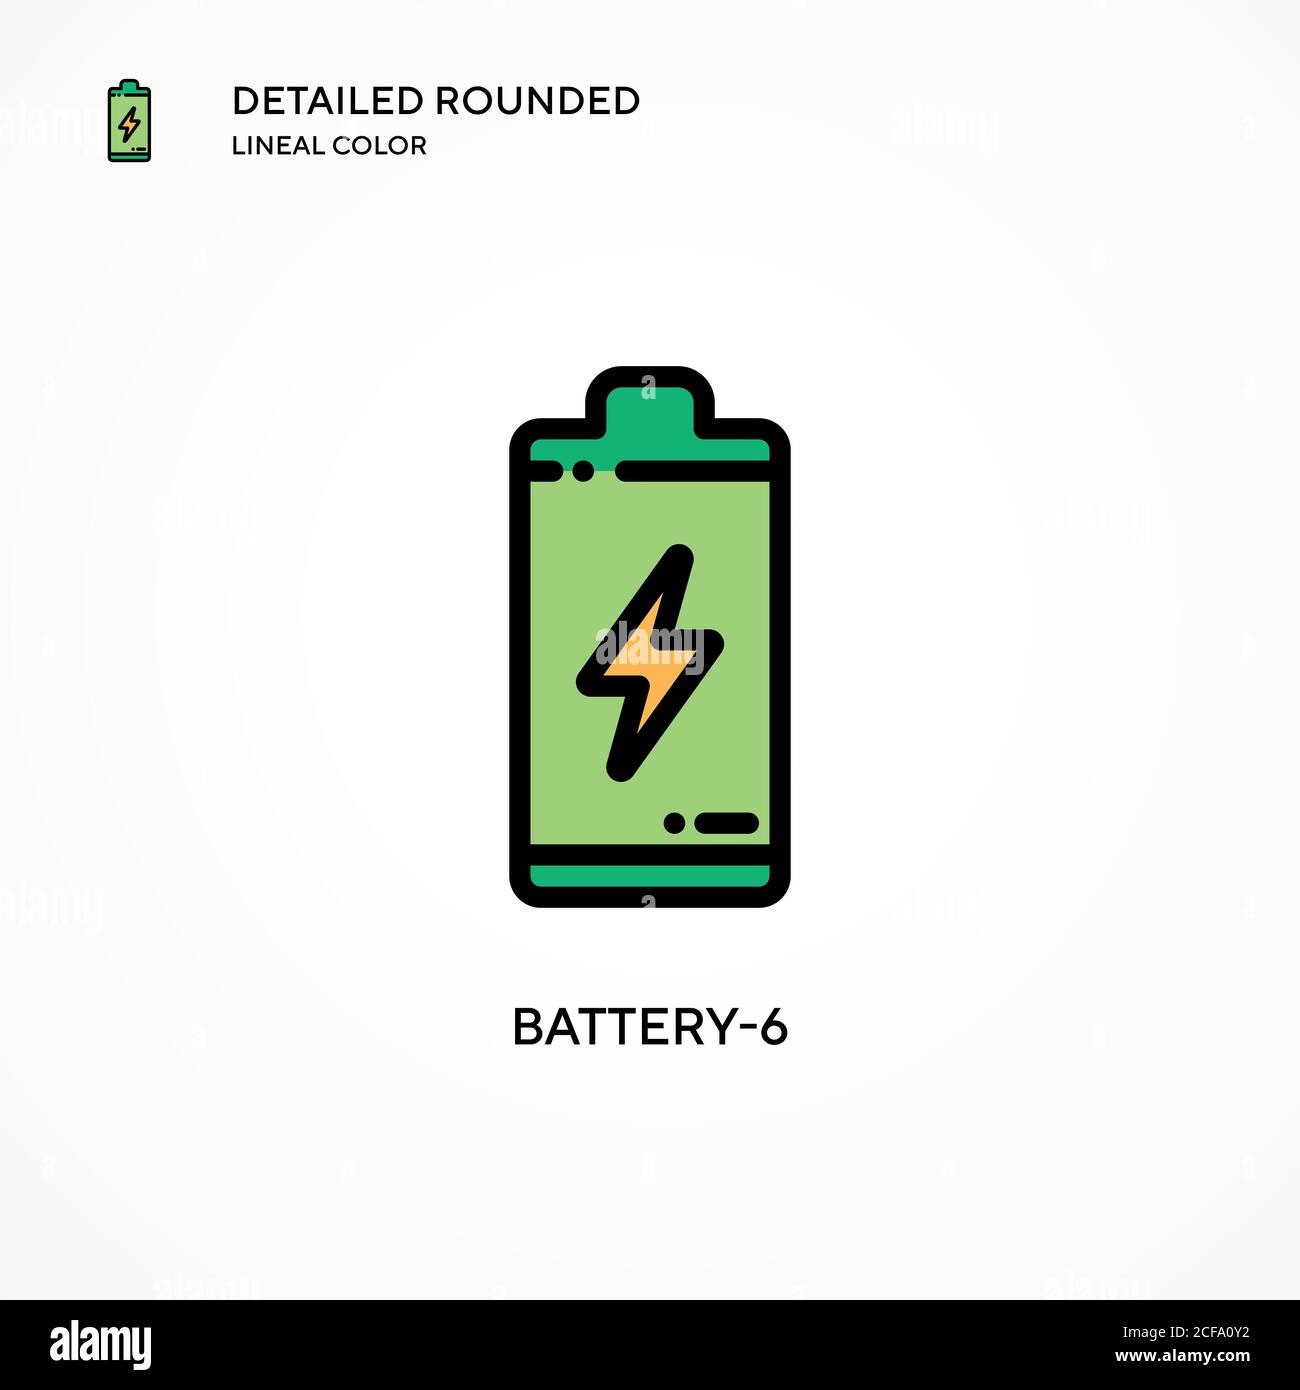 Battery-6 vector icon. Modern vector illustration concepts. Easy to edit and customize. Stock Vector